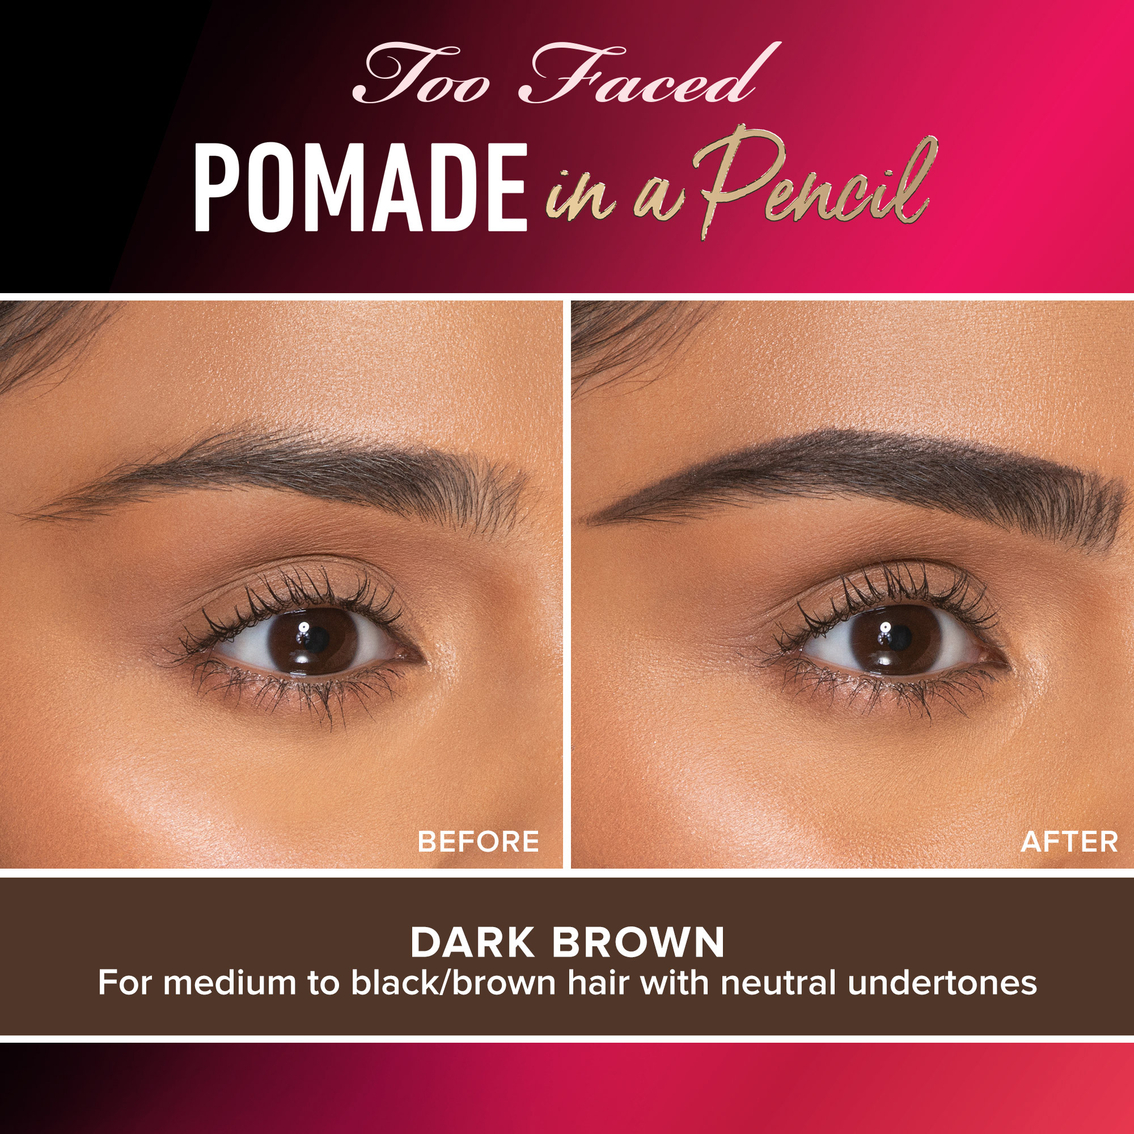 Too Faced Pomade In A Pencil - Image 3 of 6